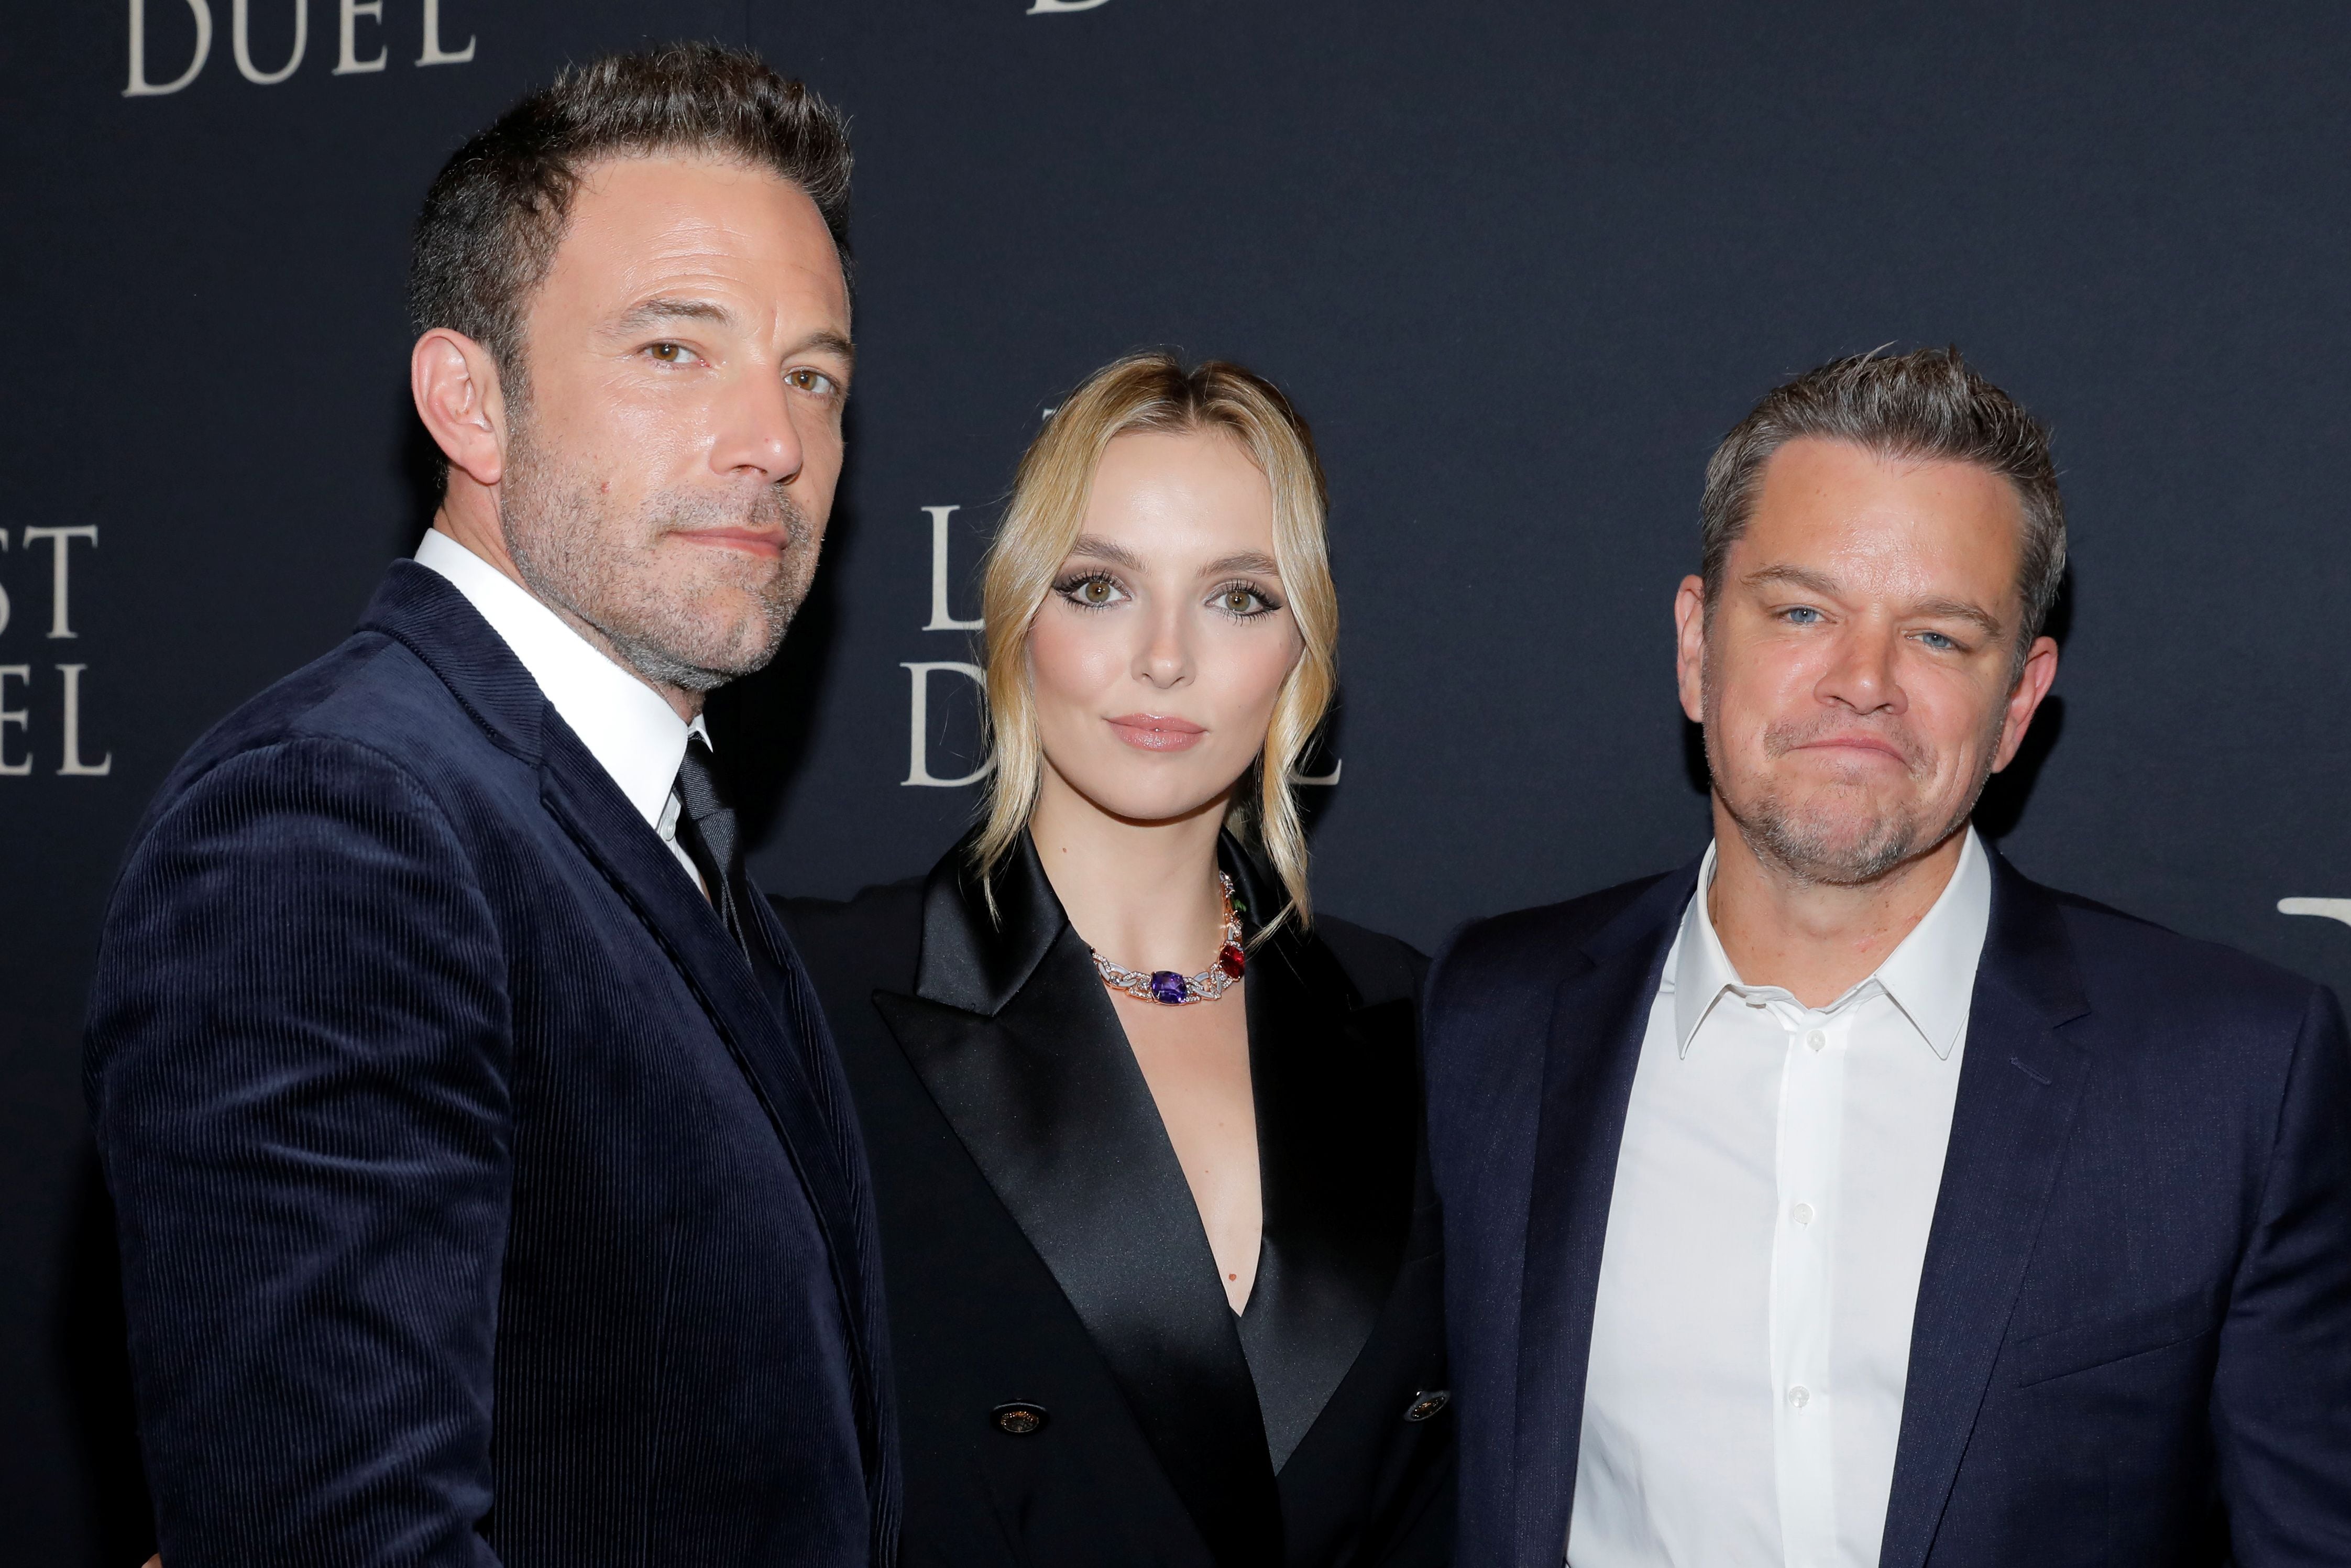 Ben Affleck, Jodie Comer and Matt Damon pose at the premiere of "The Last Duel" in Manhattan, New York, U.S., October 9, 2021. REUTERS/Andrew Kelly